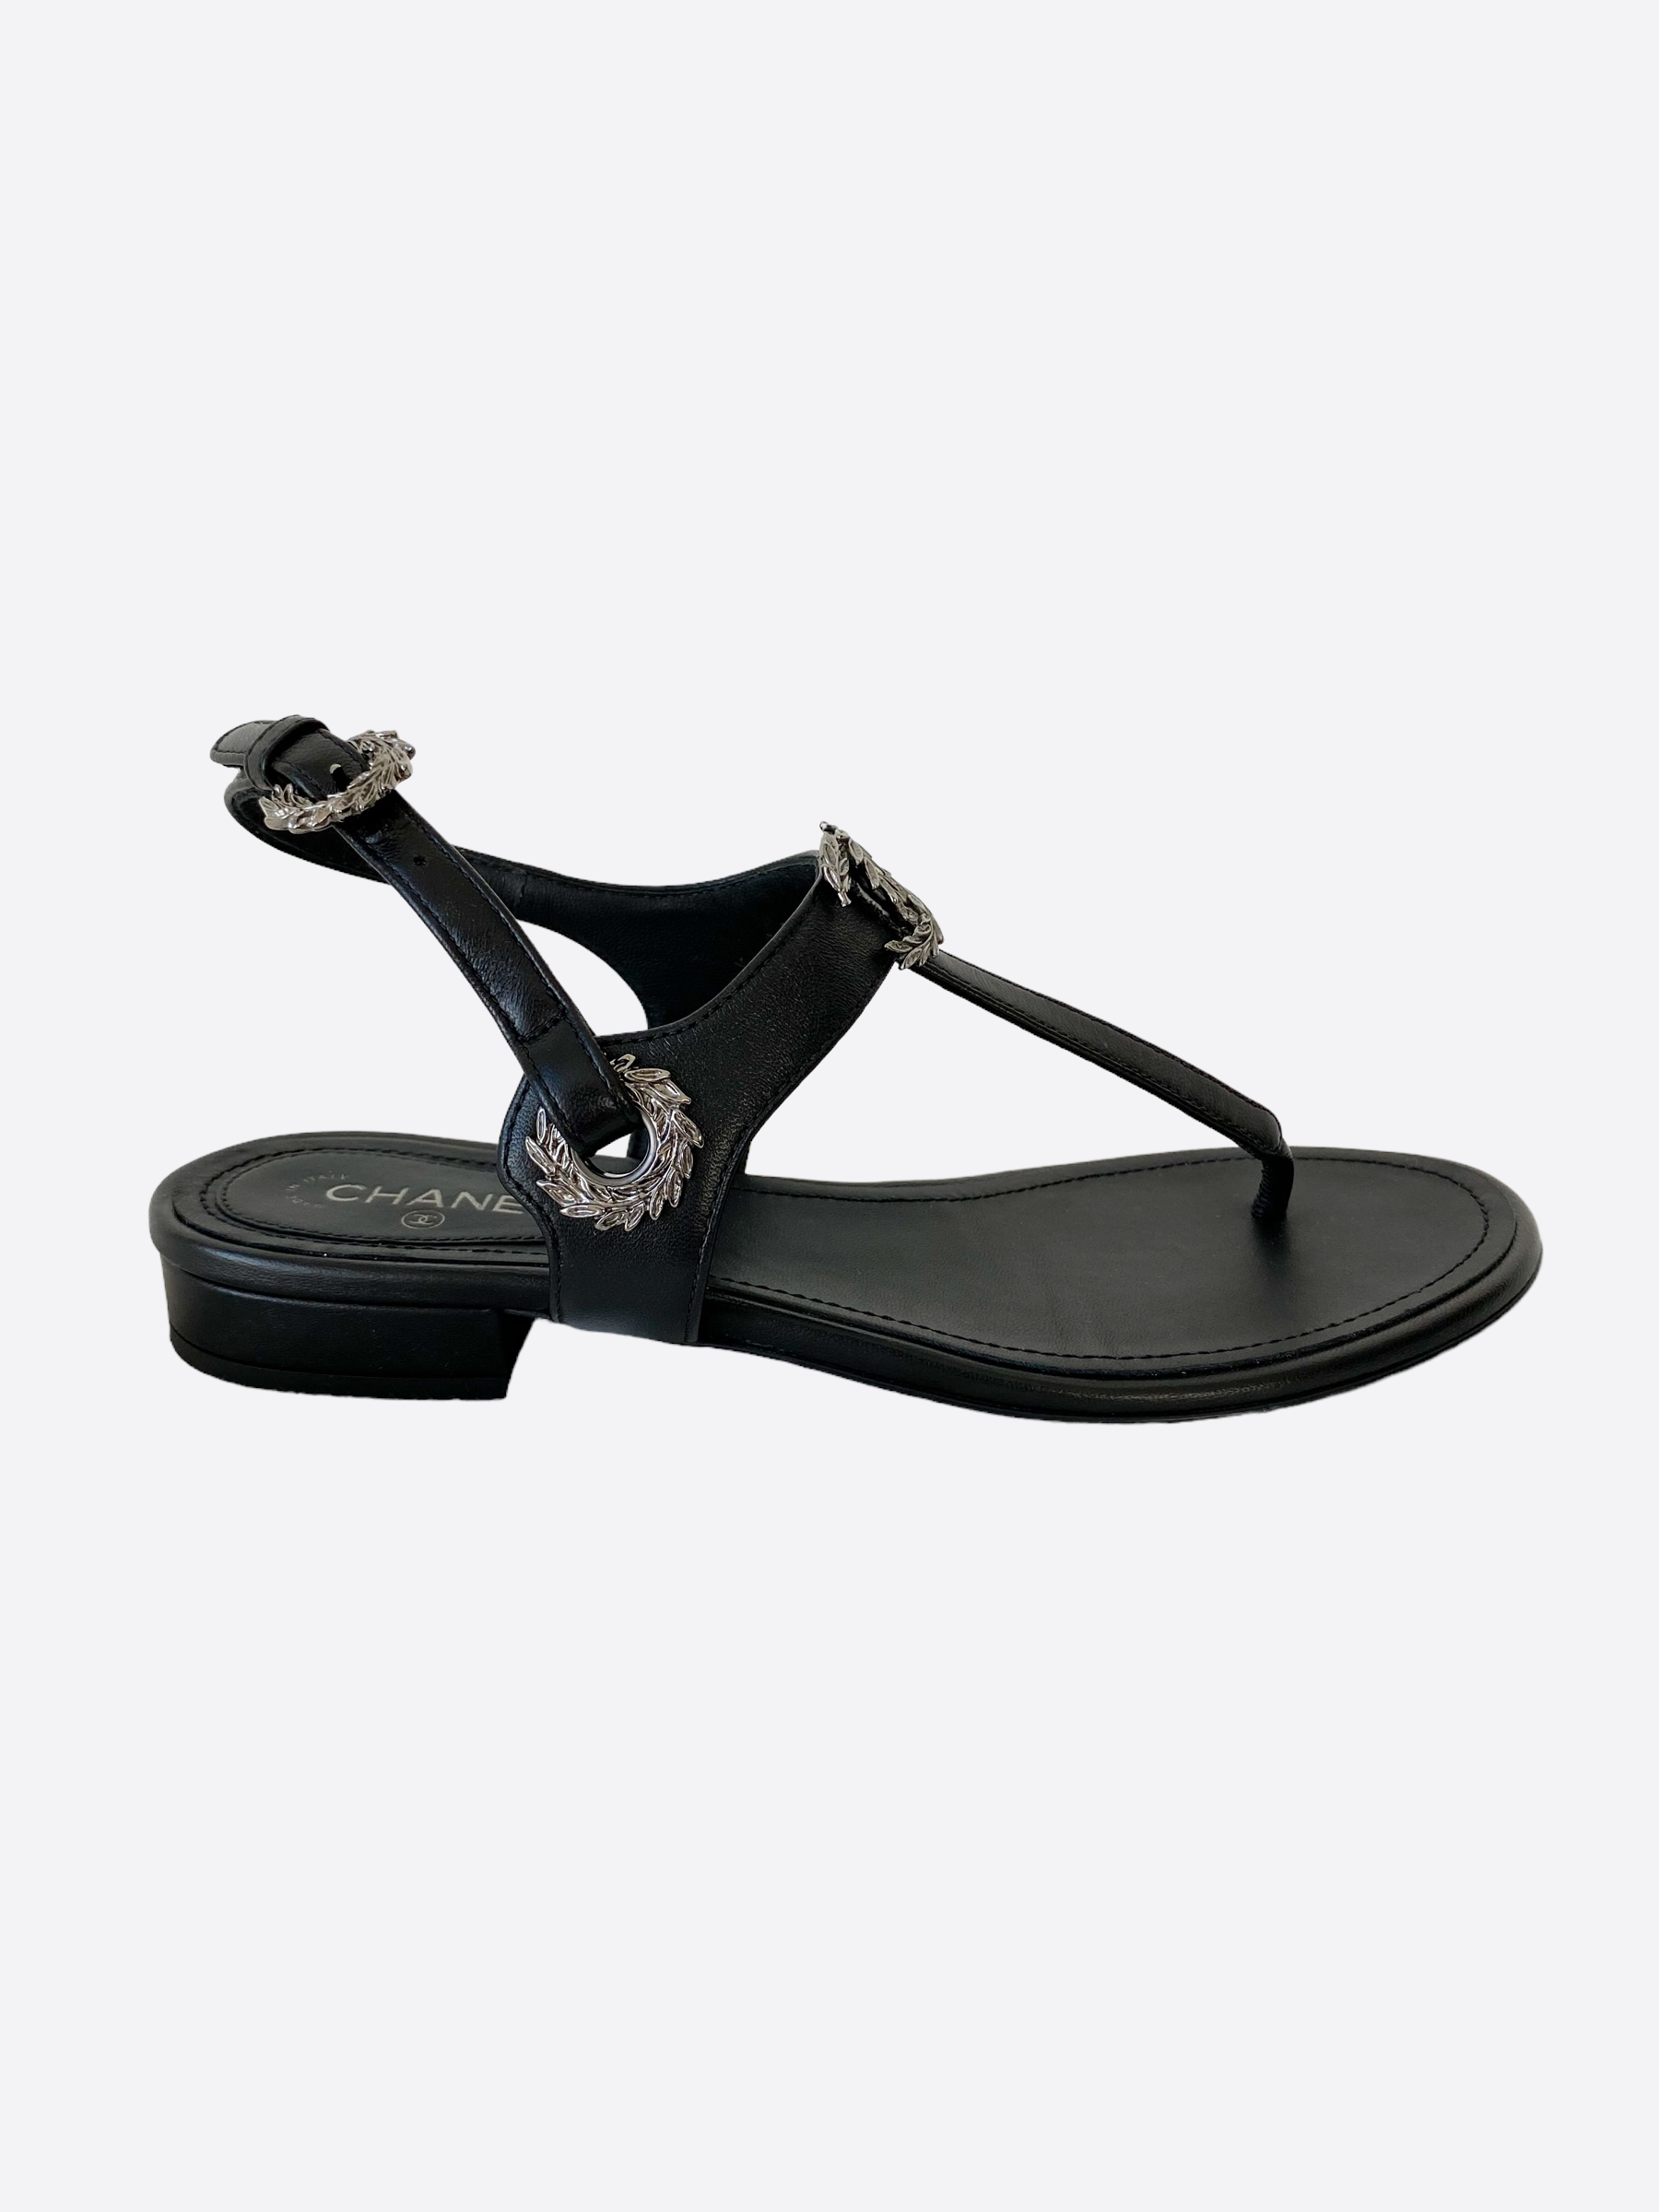 Chanel Black Leather Quilted Chain CC Logo Mule Slide Strap Flat Dad Sandal  39